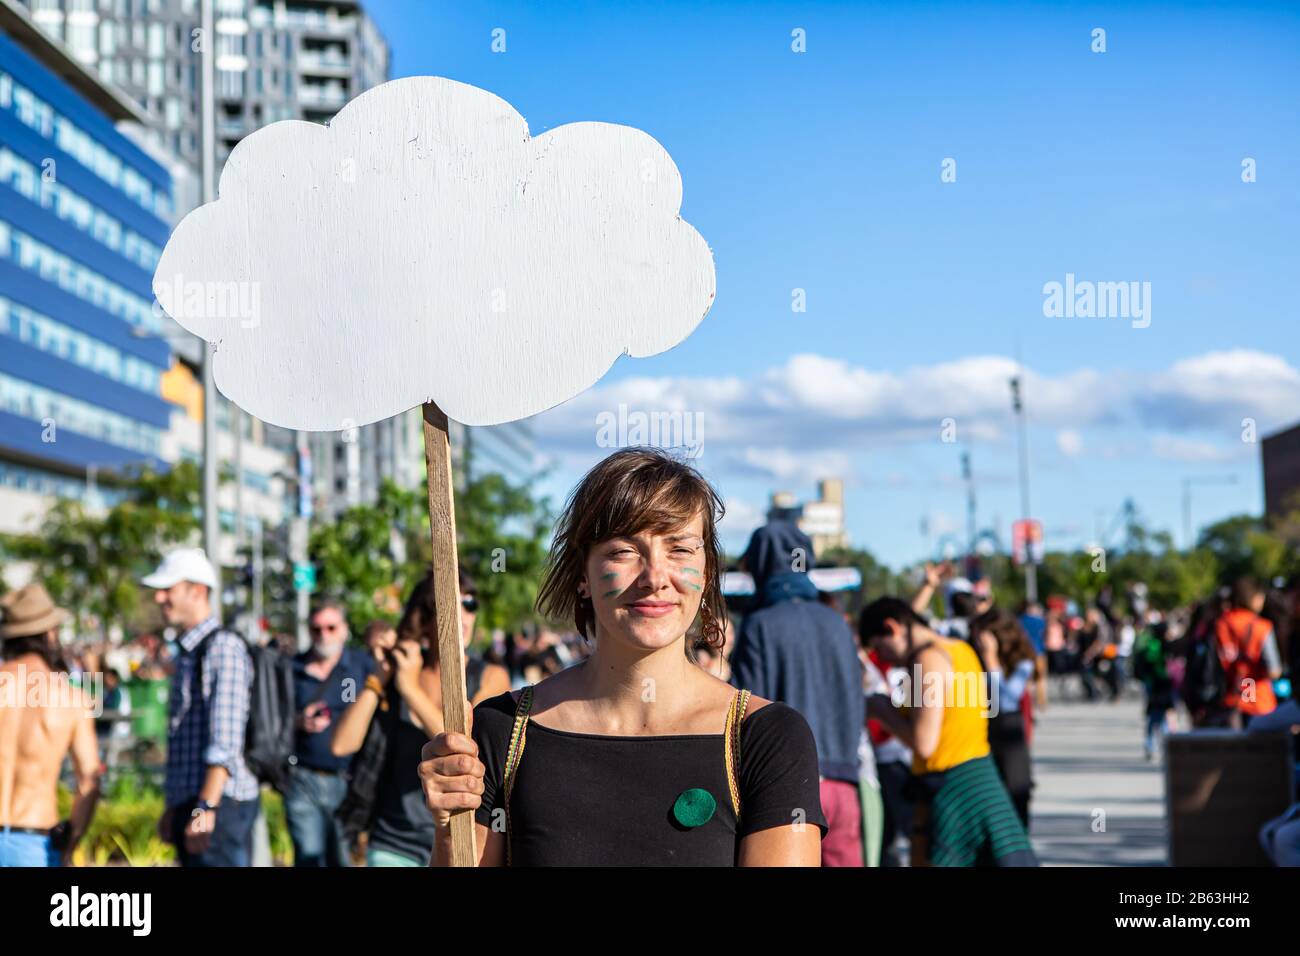 A close up head shot of a young woman holding a cloud shaped blank protest placard at a climate change rally, room for copy space against a blue sky Stock Photo